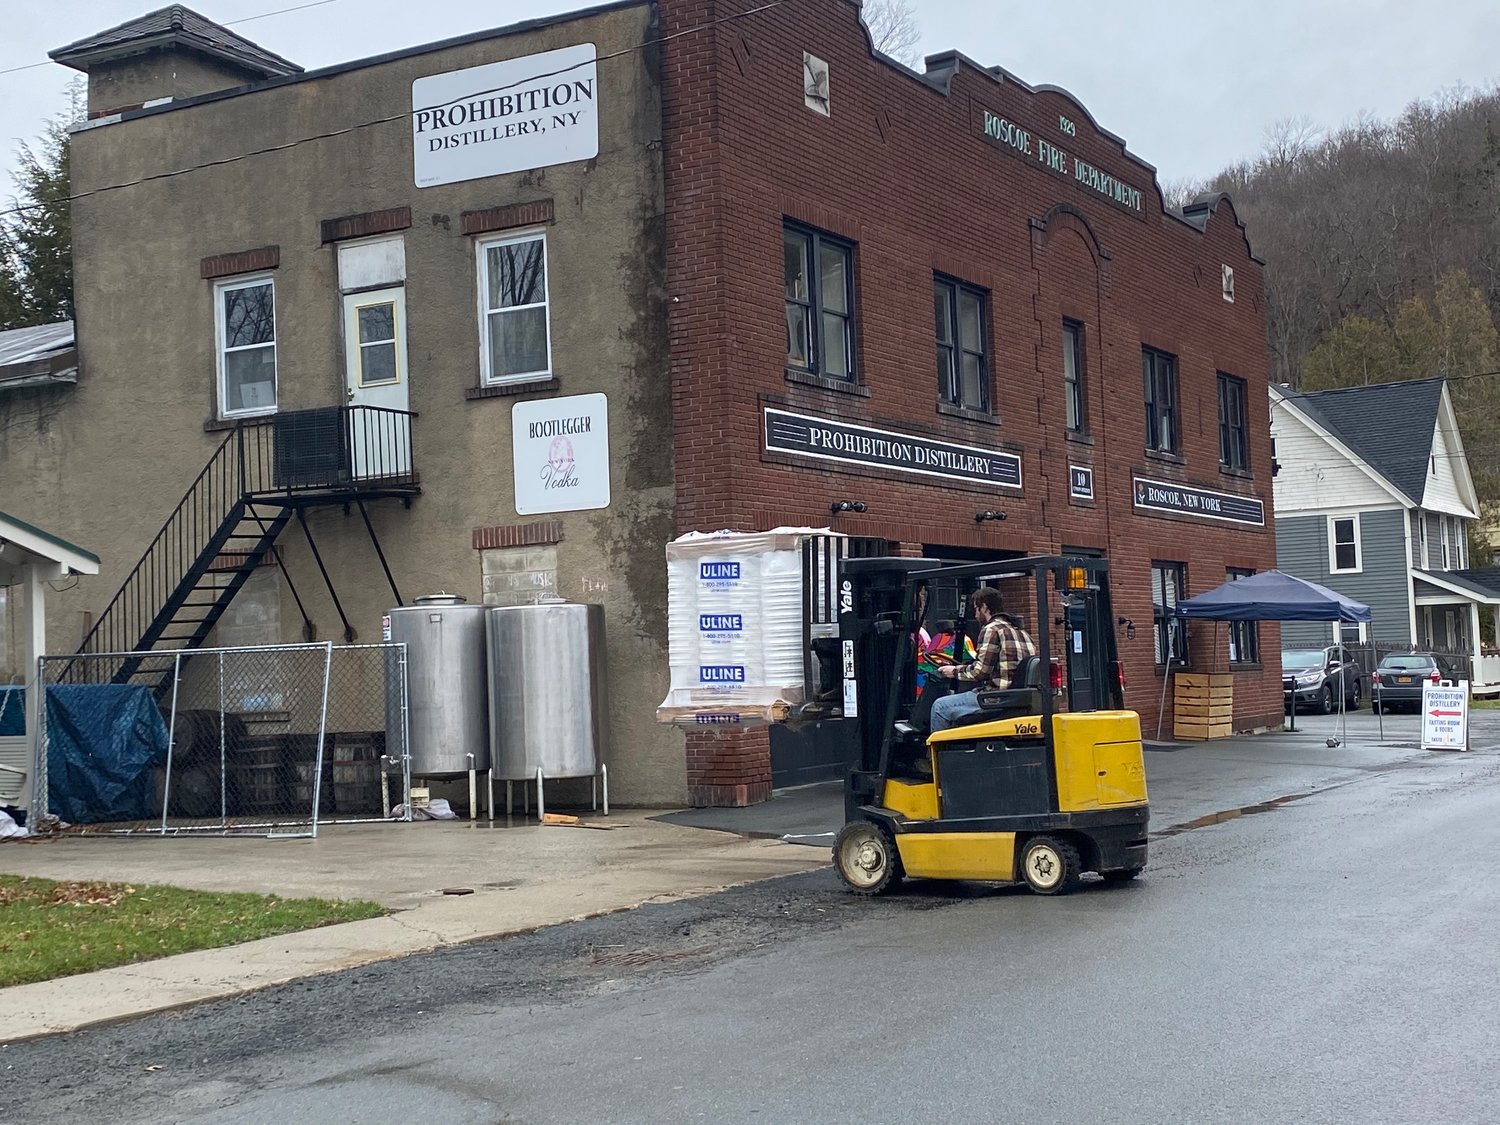 Prohibition Distillery receives “some of the pieces to this moving puzzle to get sanitizer out to the front liners.”